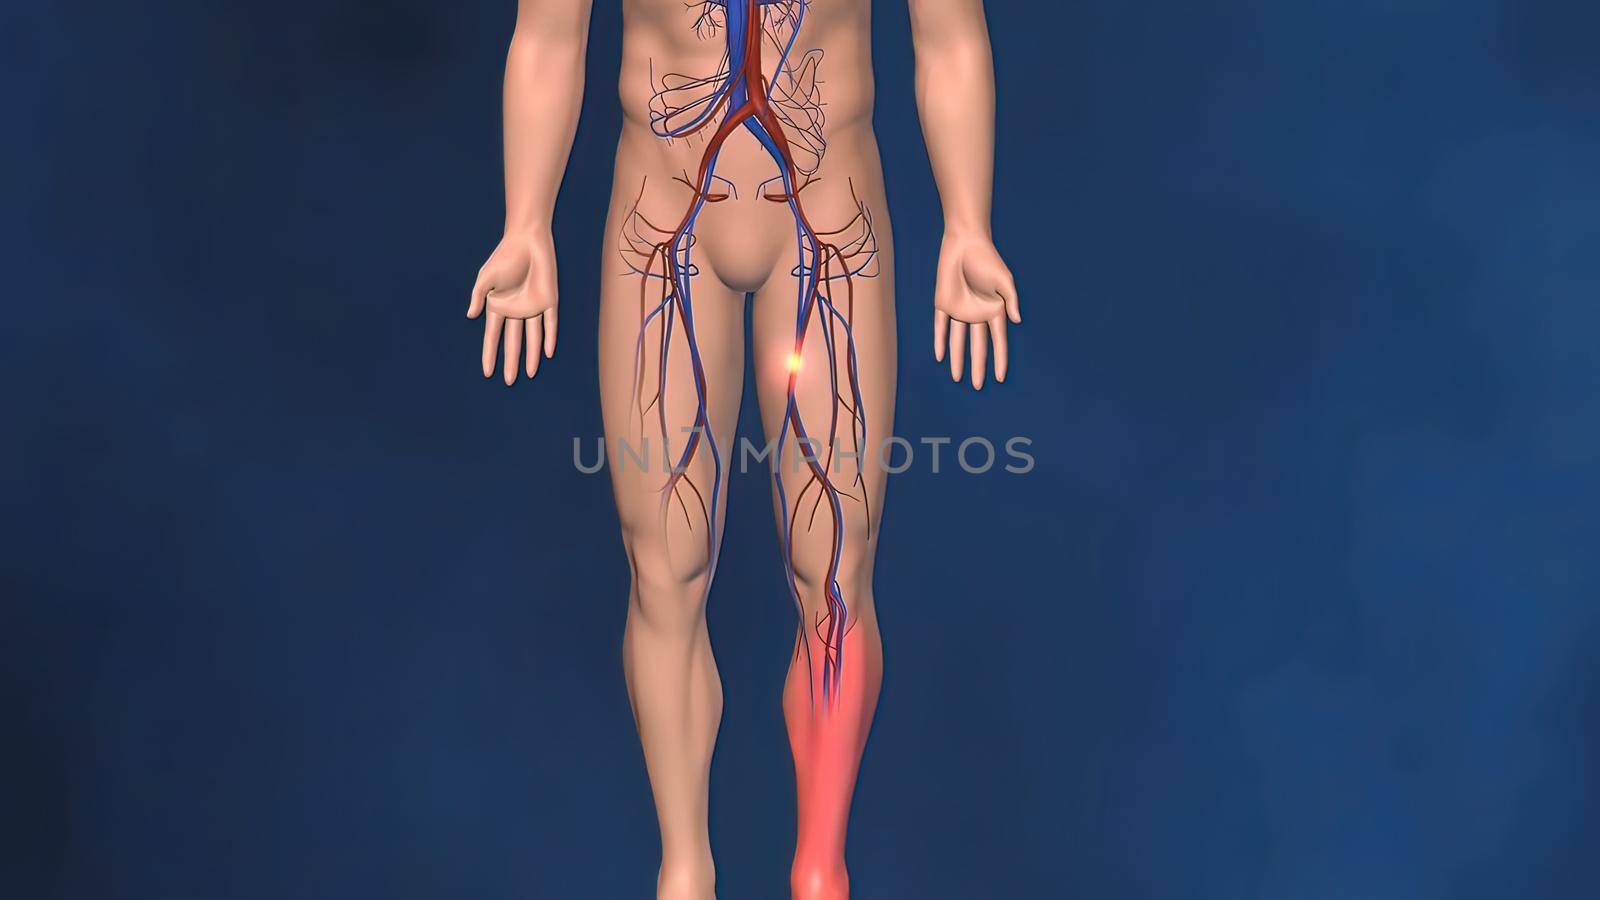 Blood clots are semi-solid masses of blood that can be stationary (thrombosis) and block blood flow or break loose (embolism) 3D Illustration